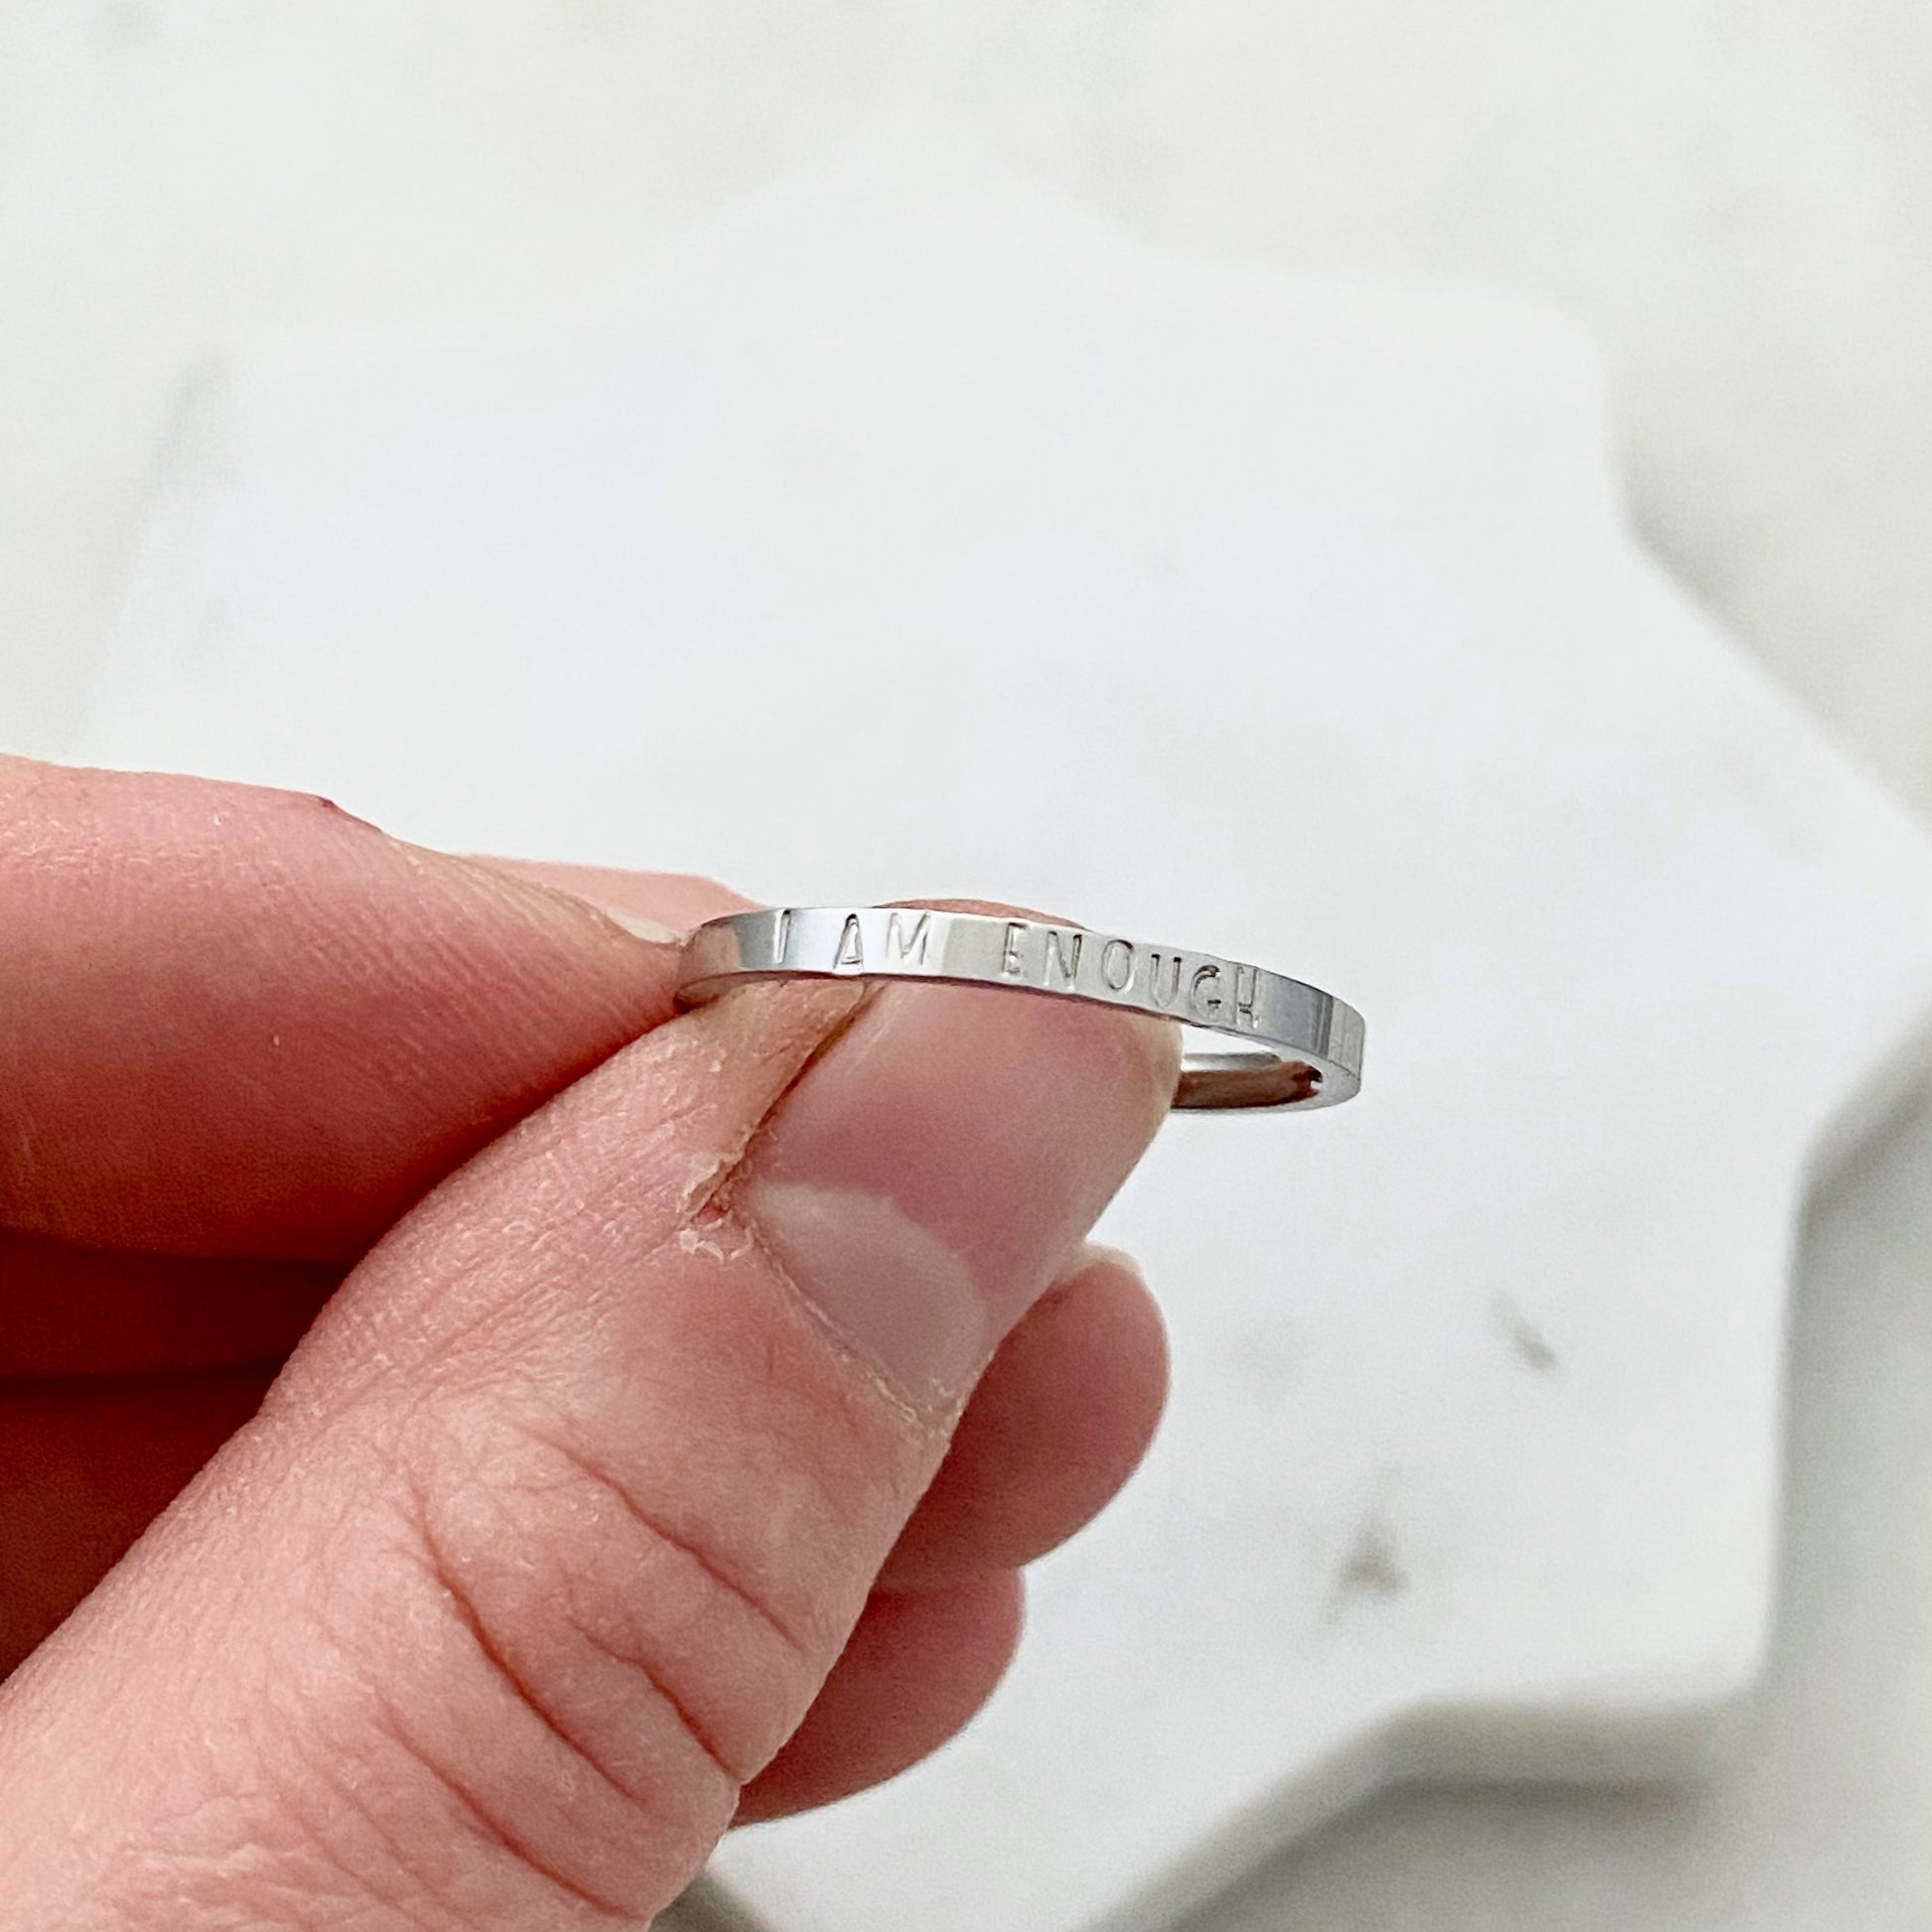 I am Enough, Size 8, Silver Mini Stacking Ring, Stainless Steel Jewelry, Minimalist Rings, Waterproof Jewelry, Dainty Ring, Stacking Ring Set Rings callistafaye   